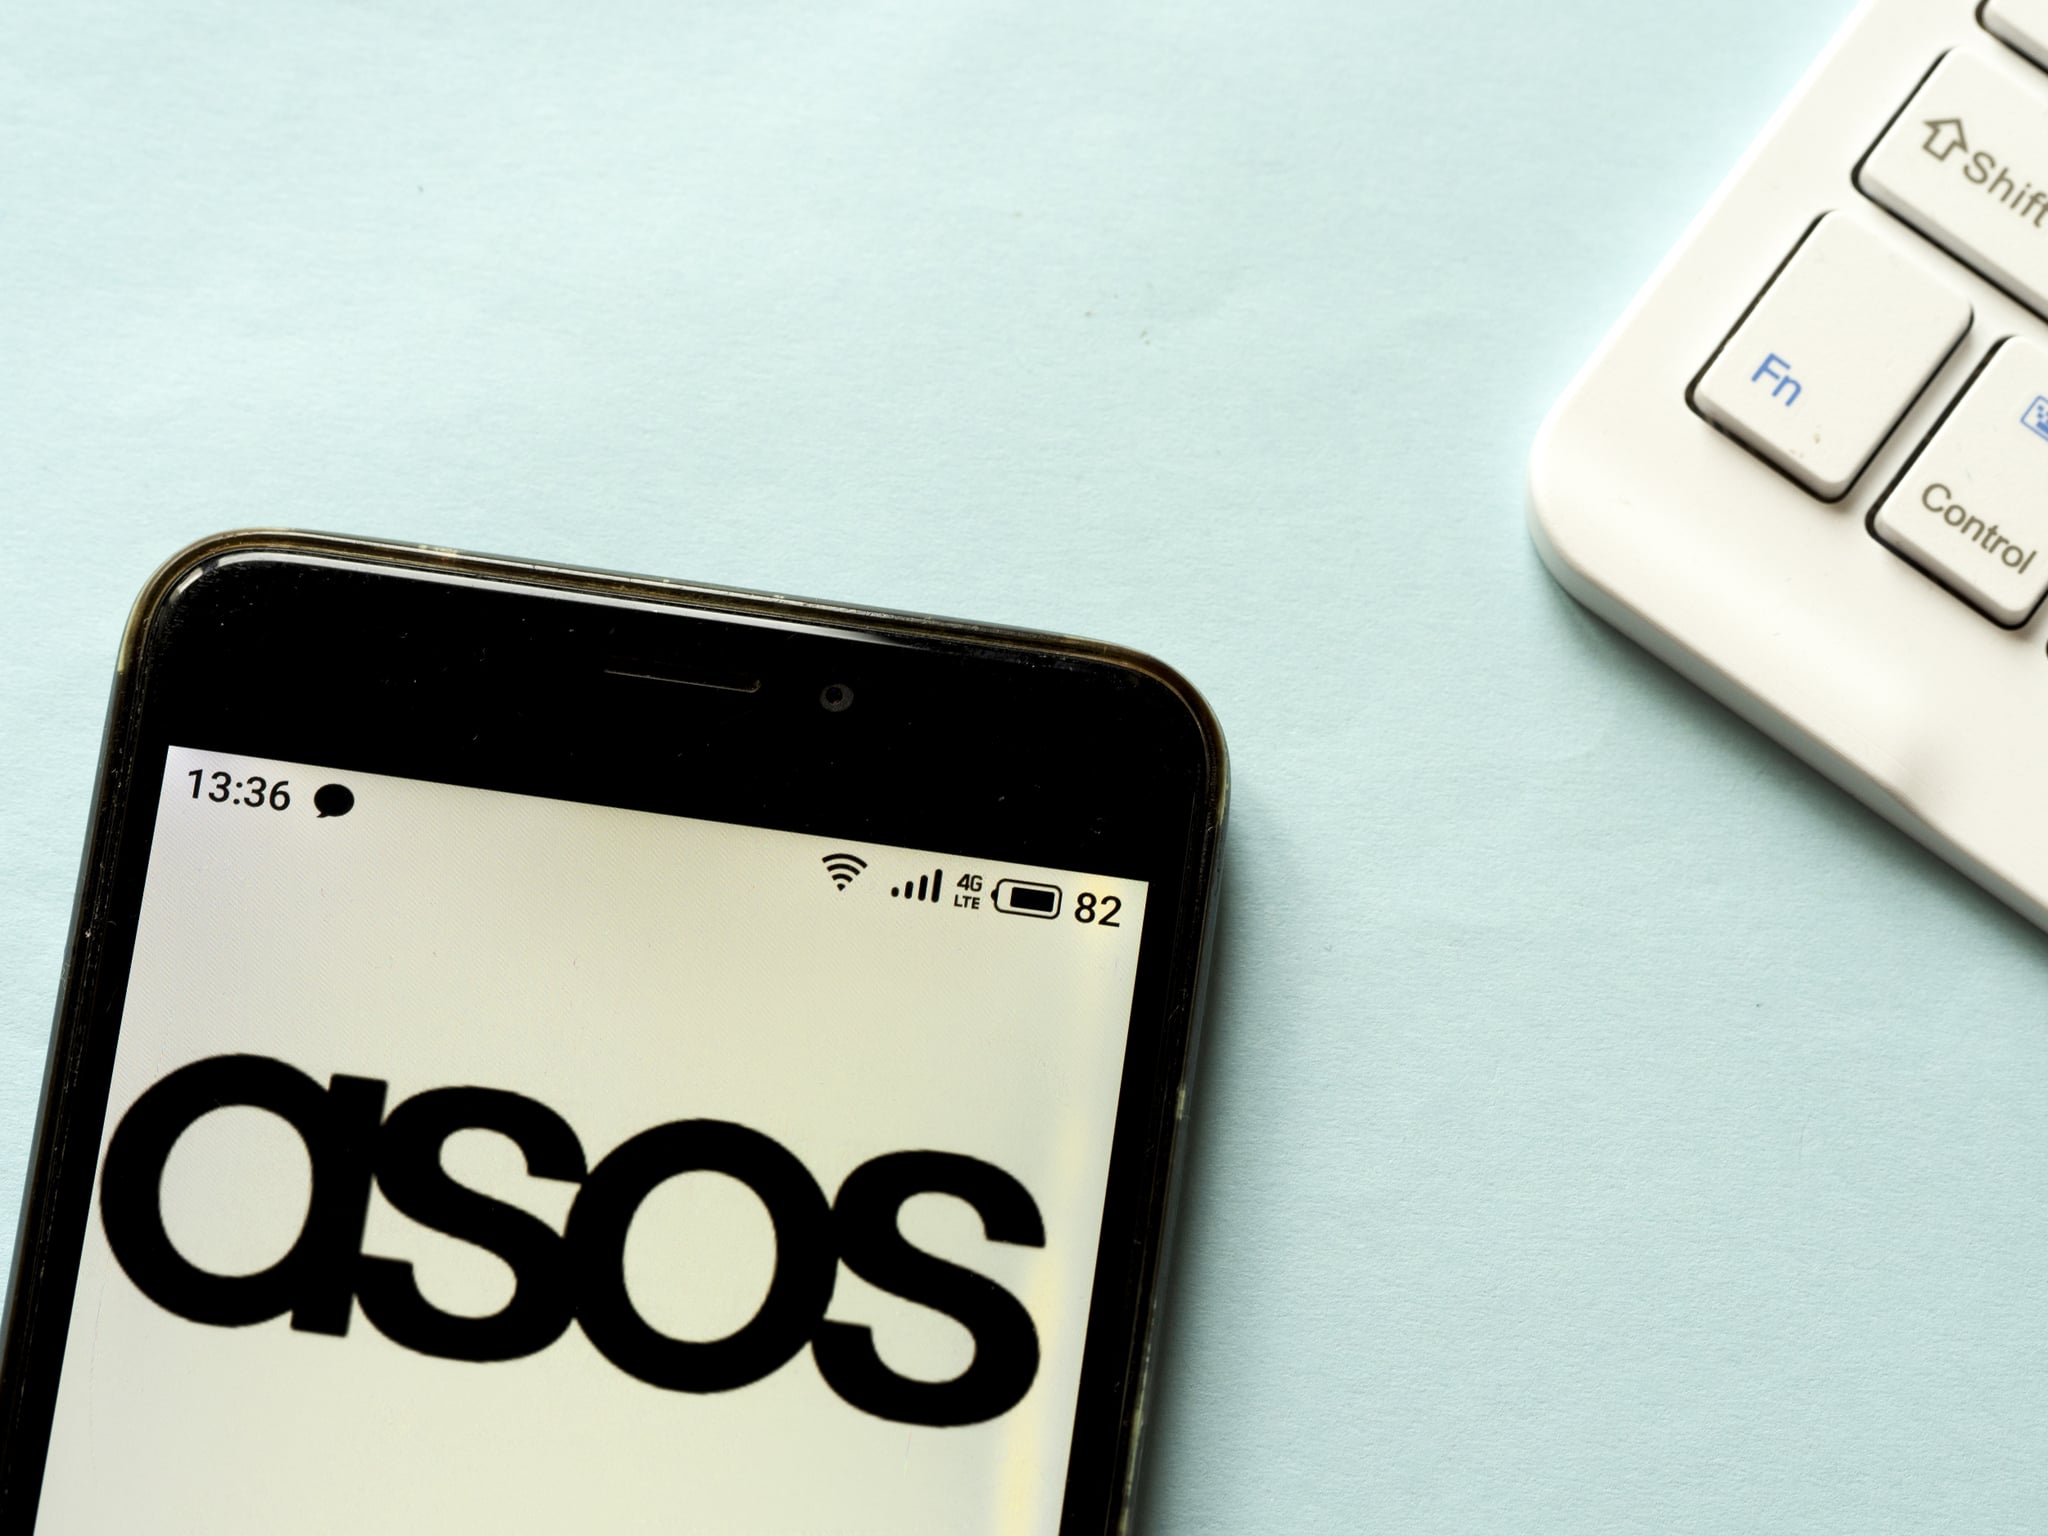 UKRAINE - 2020/04/25: In this photo illustration an Asos logo is seen displayed on a smartphone. (Photo Illustration by Igor Golovniov/SOPA Images/LightRocket via Getty Images)